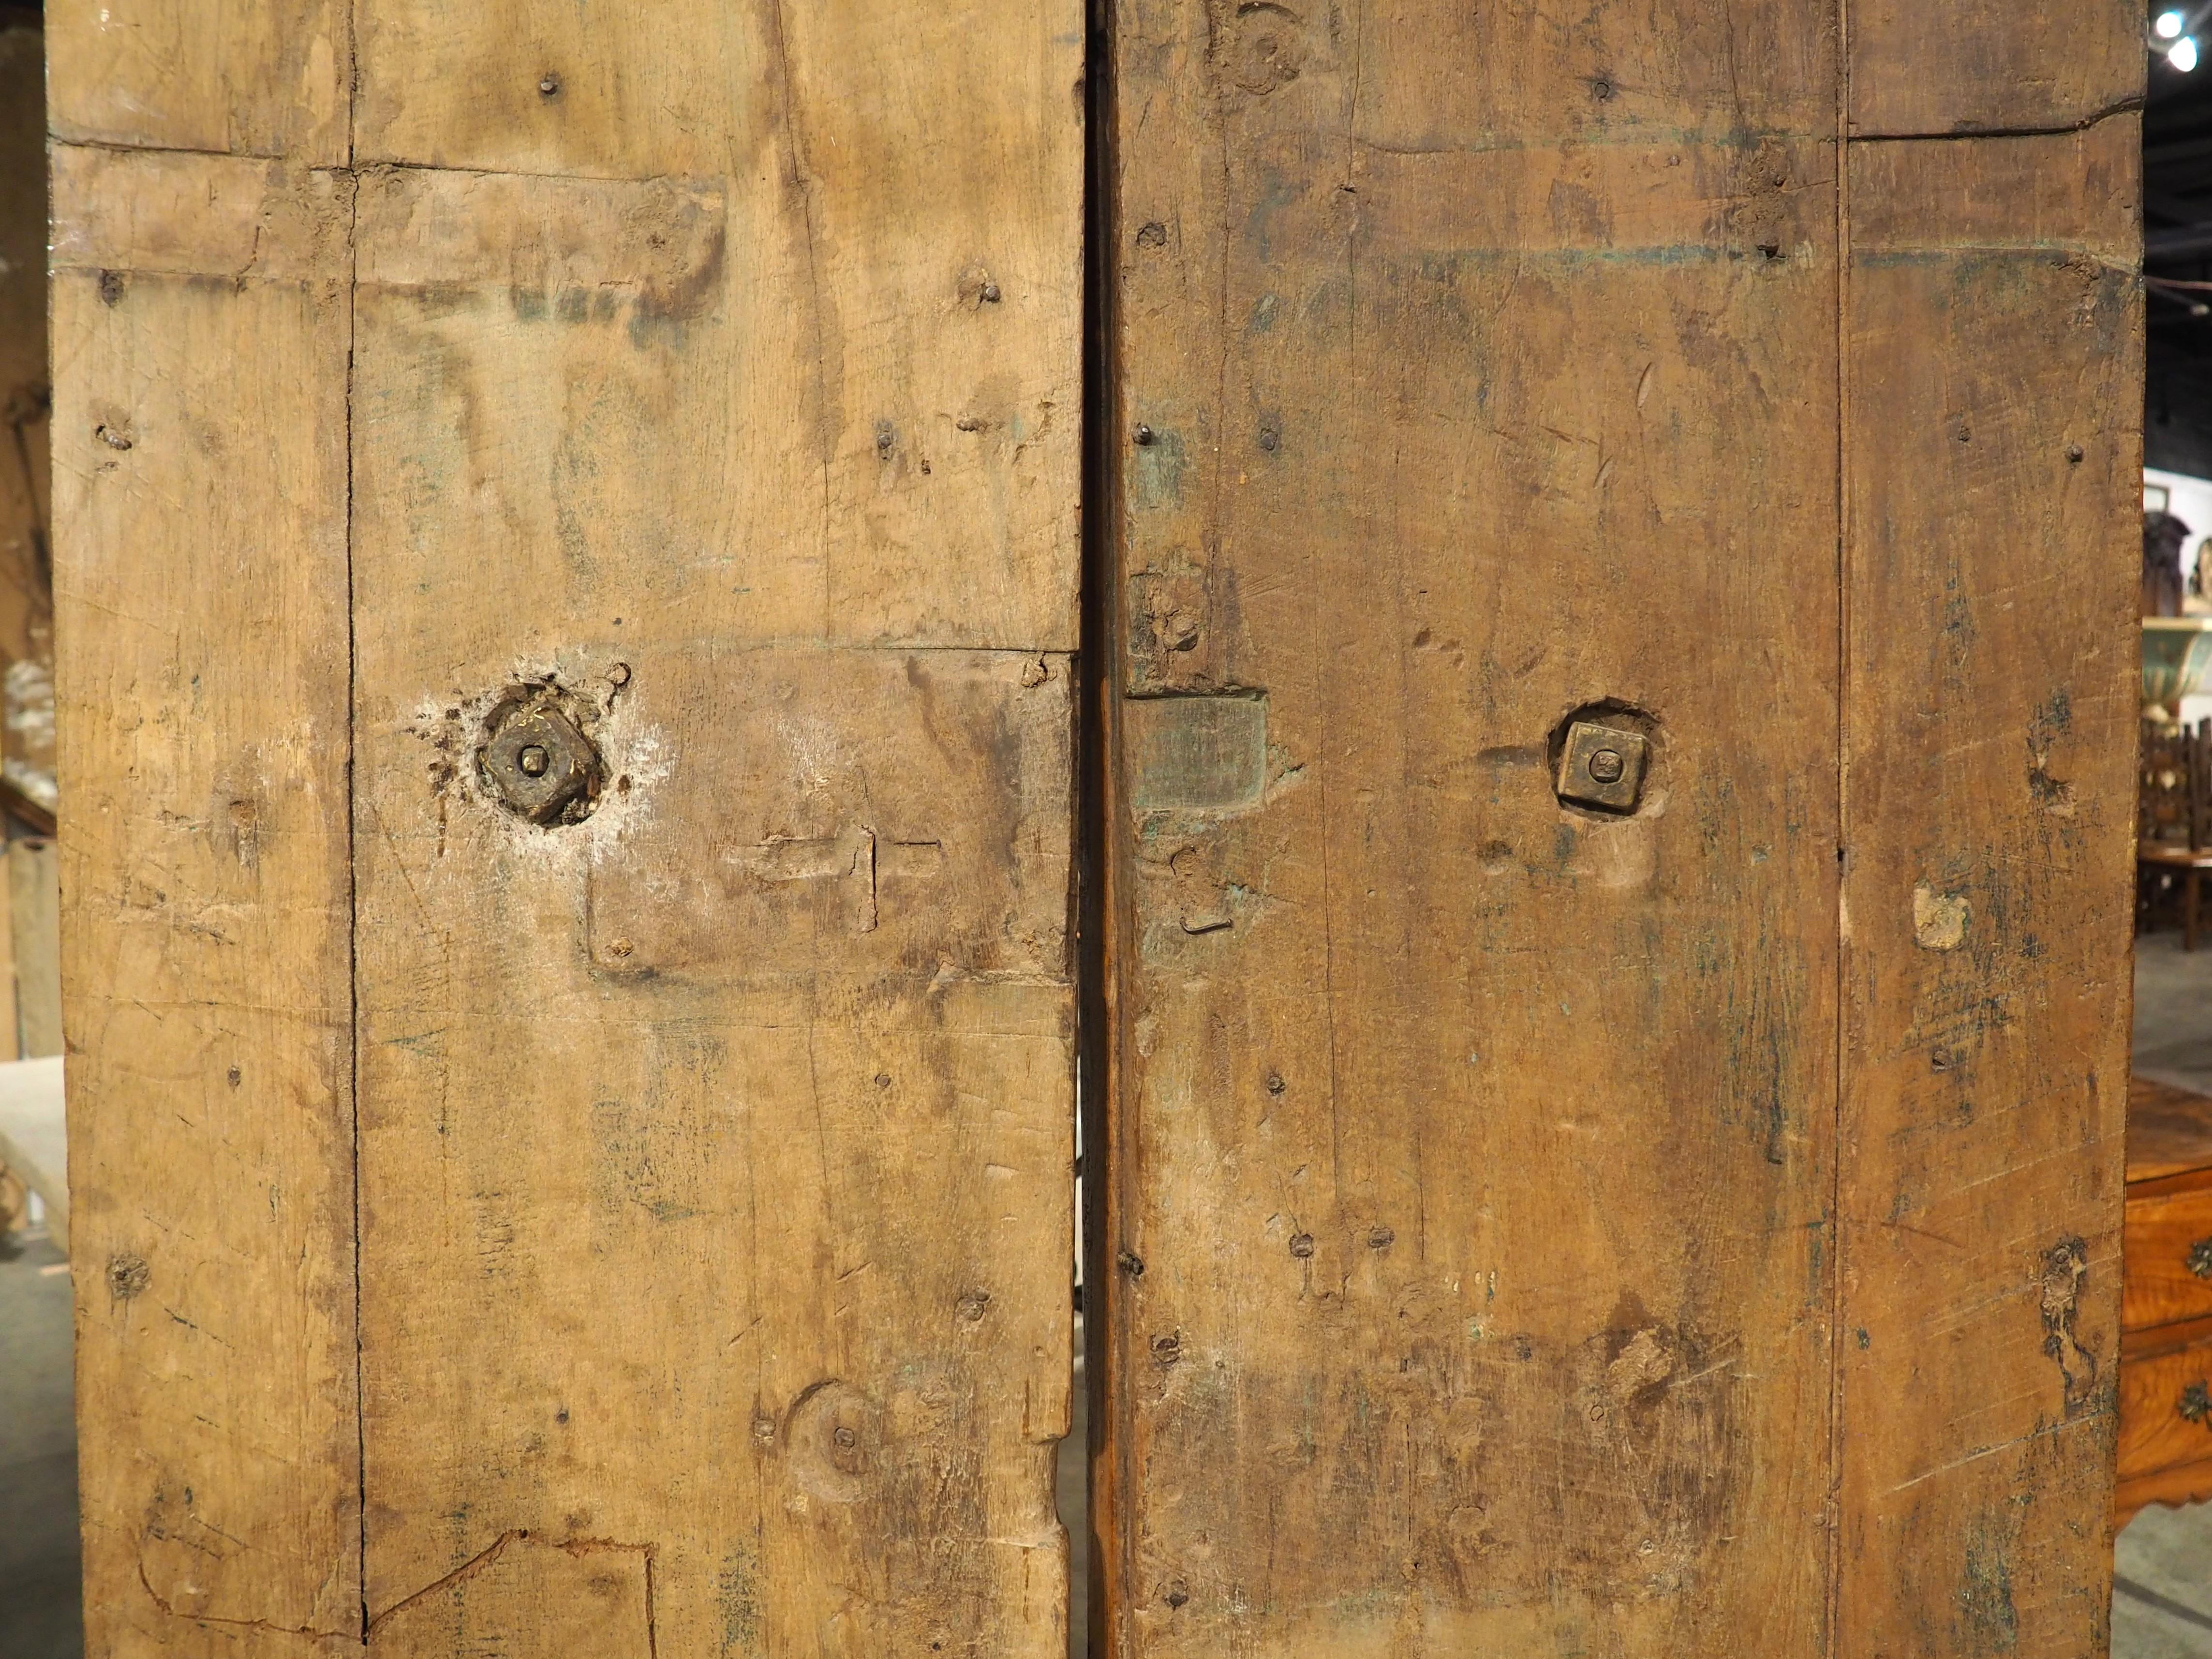 Spanish furniture and architecturals of the 18th century, such as this pair of walnut wood entry doors, were highly influenced by French stylings. Hand-carved circa 1750, the doors feature deep, sinuous moldings, reminiscent of the curvaceous motifs